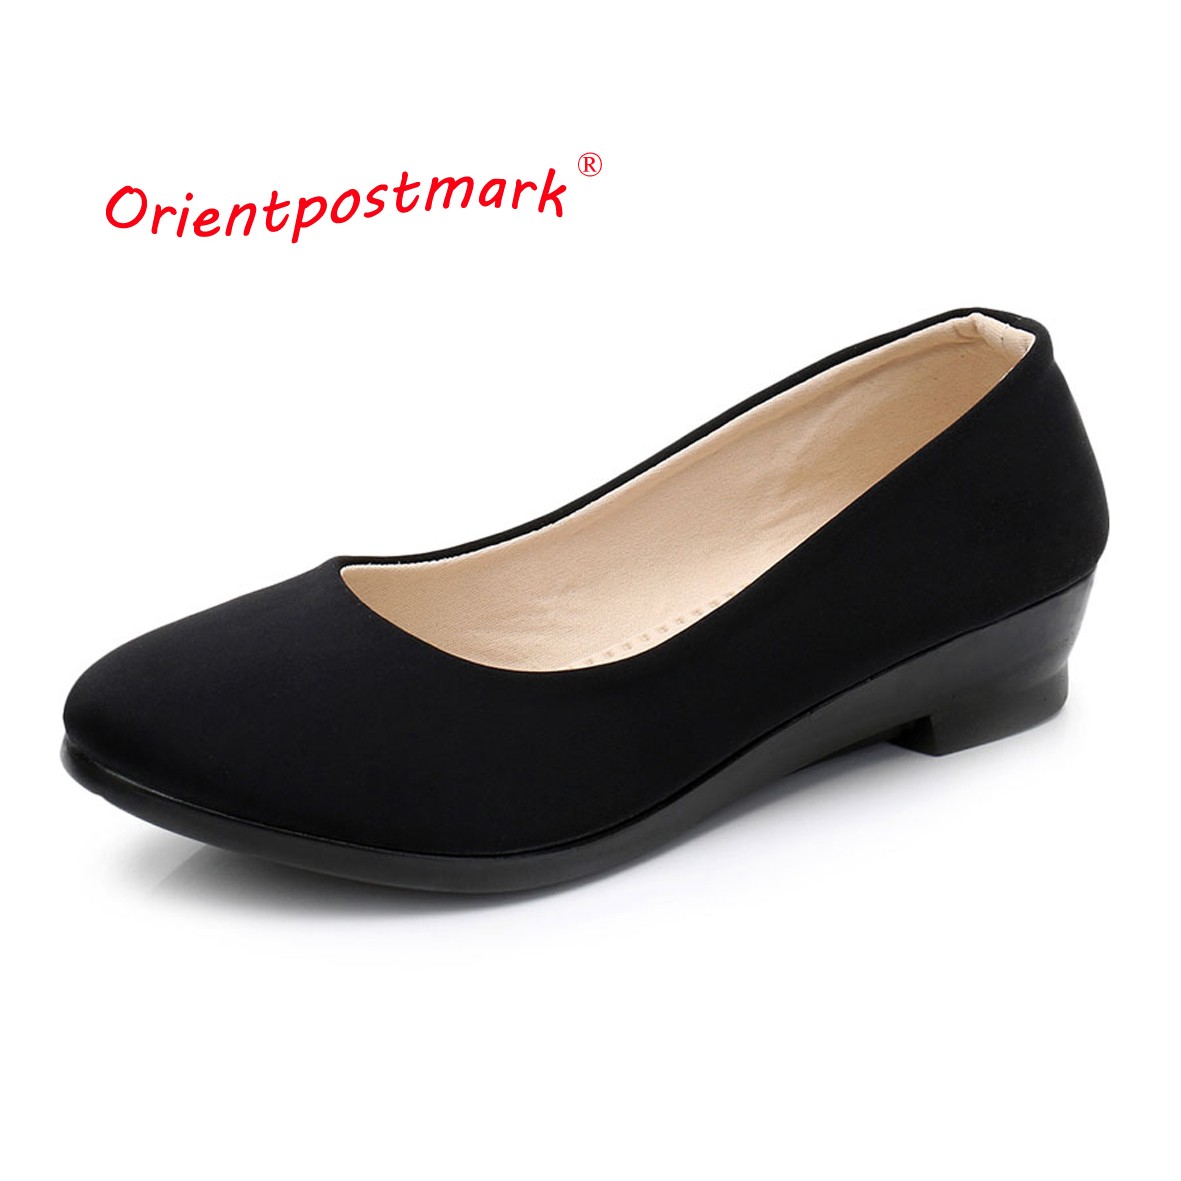 Black Ballet Shoes Women Office Work Boat Shoes Canvas Moccasin Shoes Pregnant Women Loafers